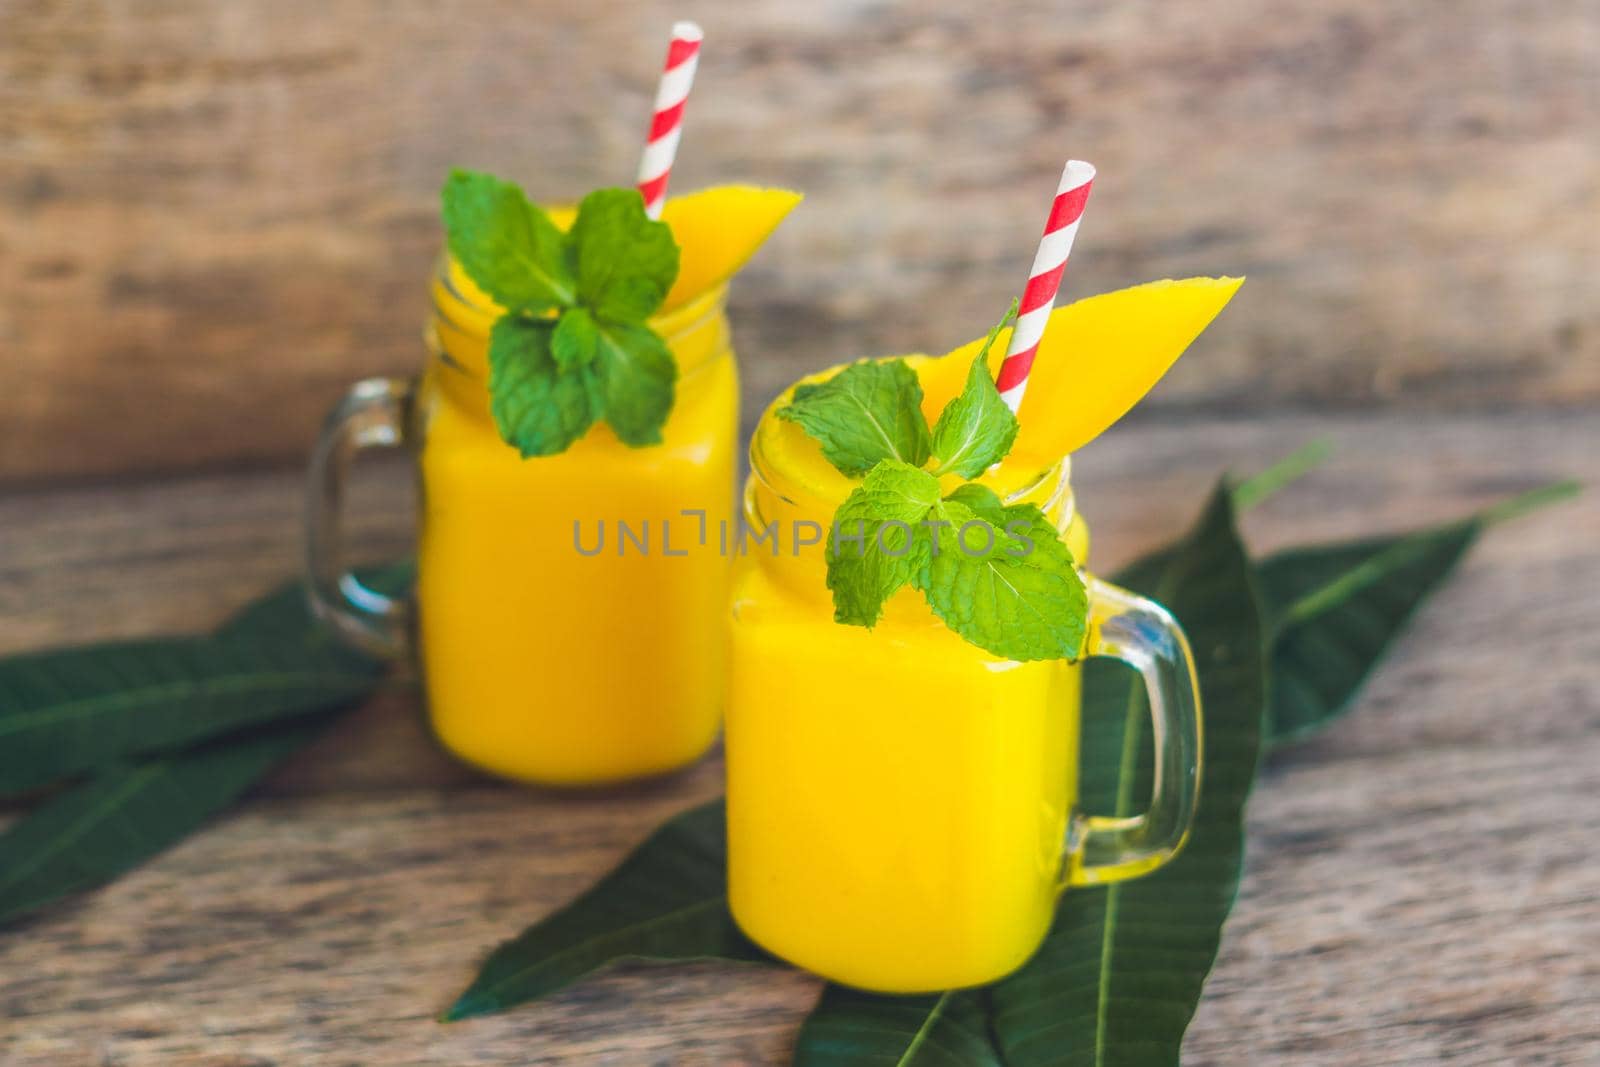 Juicy smoothie from mango in two glass mason jars with striped red straw on old wooden background. Healthy life concept, copy space.